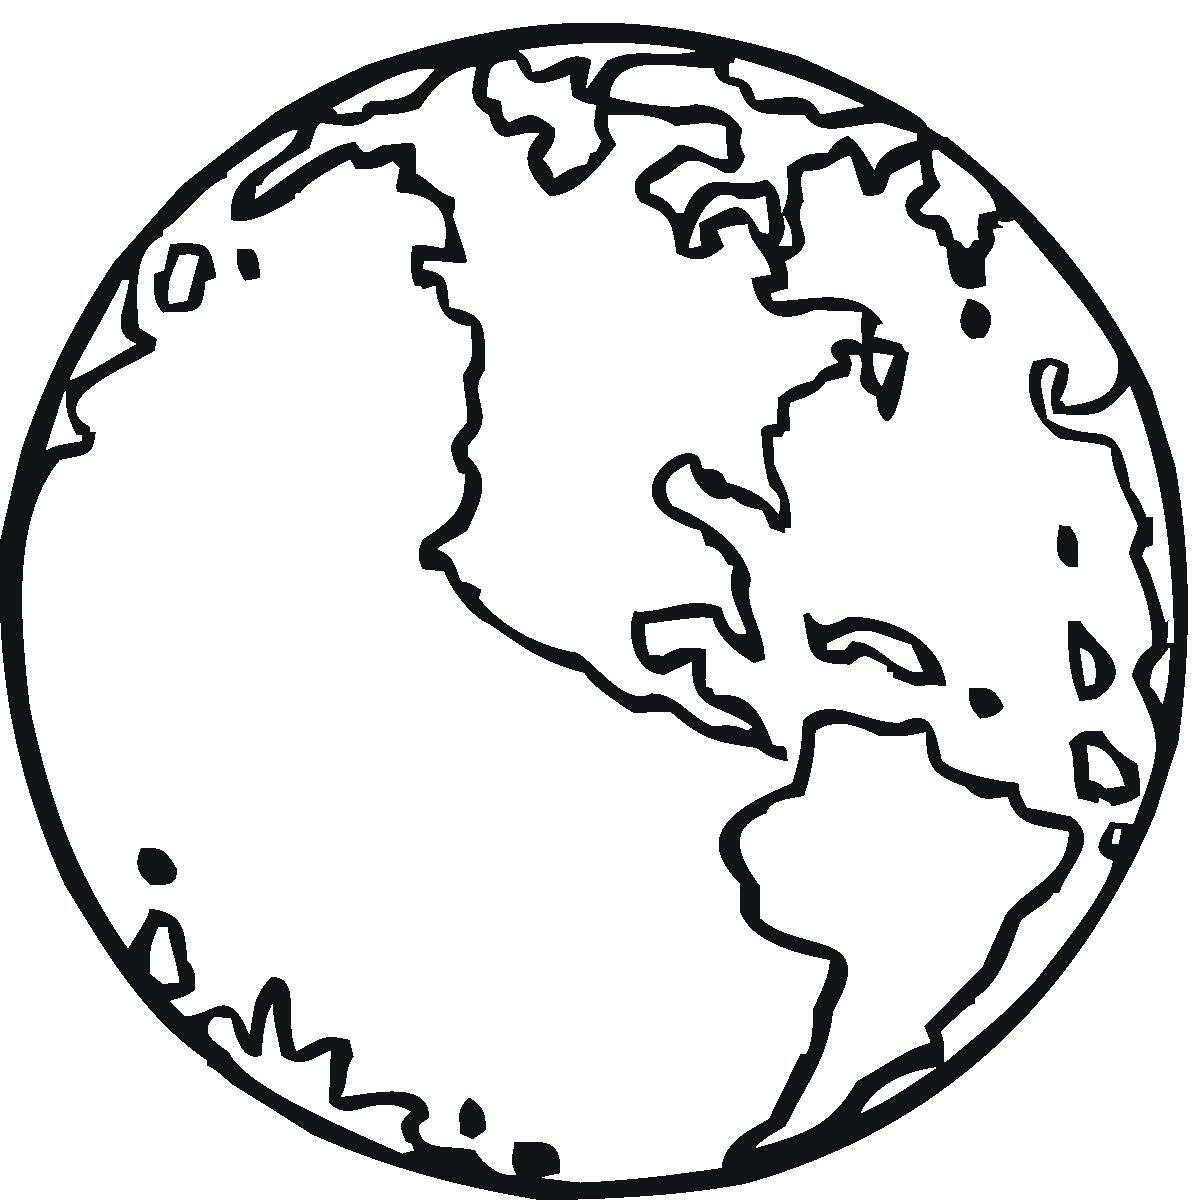 Free Printable Earth Coloring Pages For Kids | Stuff | Pinterest - Free Printable Earth Pictures